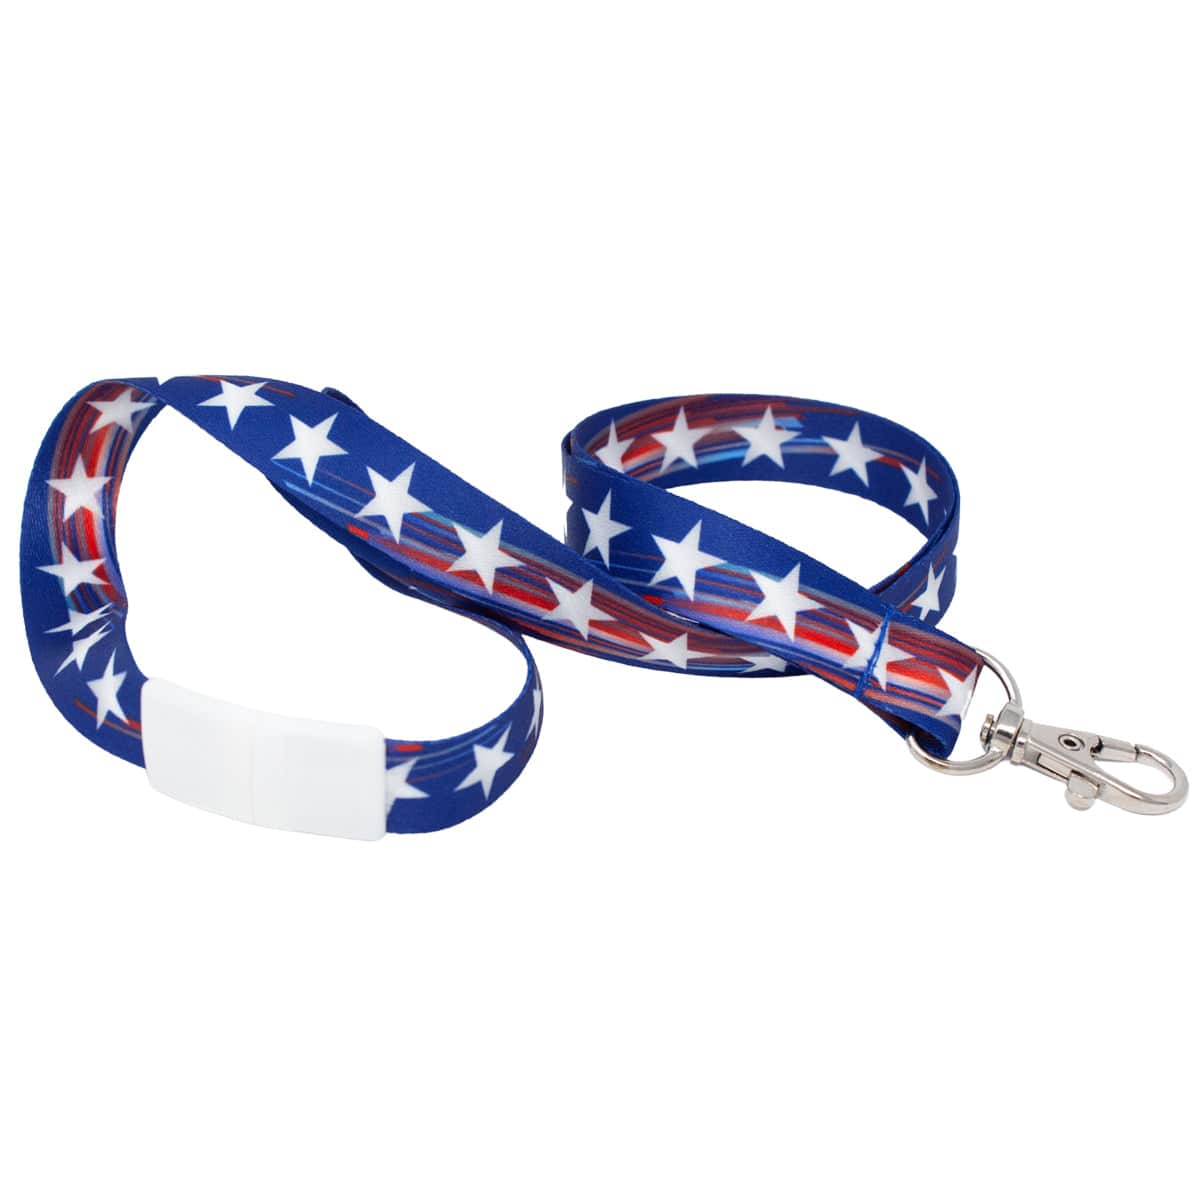 4th of July Patriotic USA Lanyard with Breakaway  - Red White & Blue with Stars (2138-5305) 2138-5305